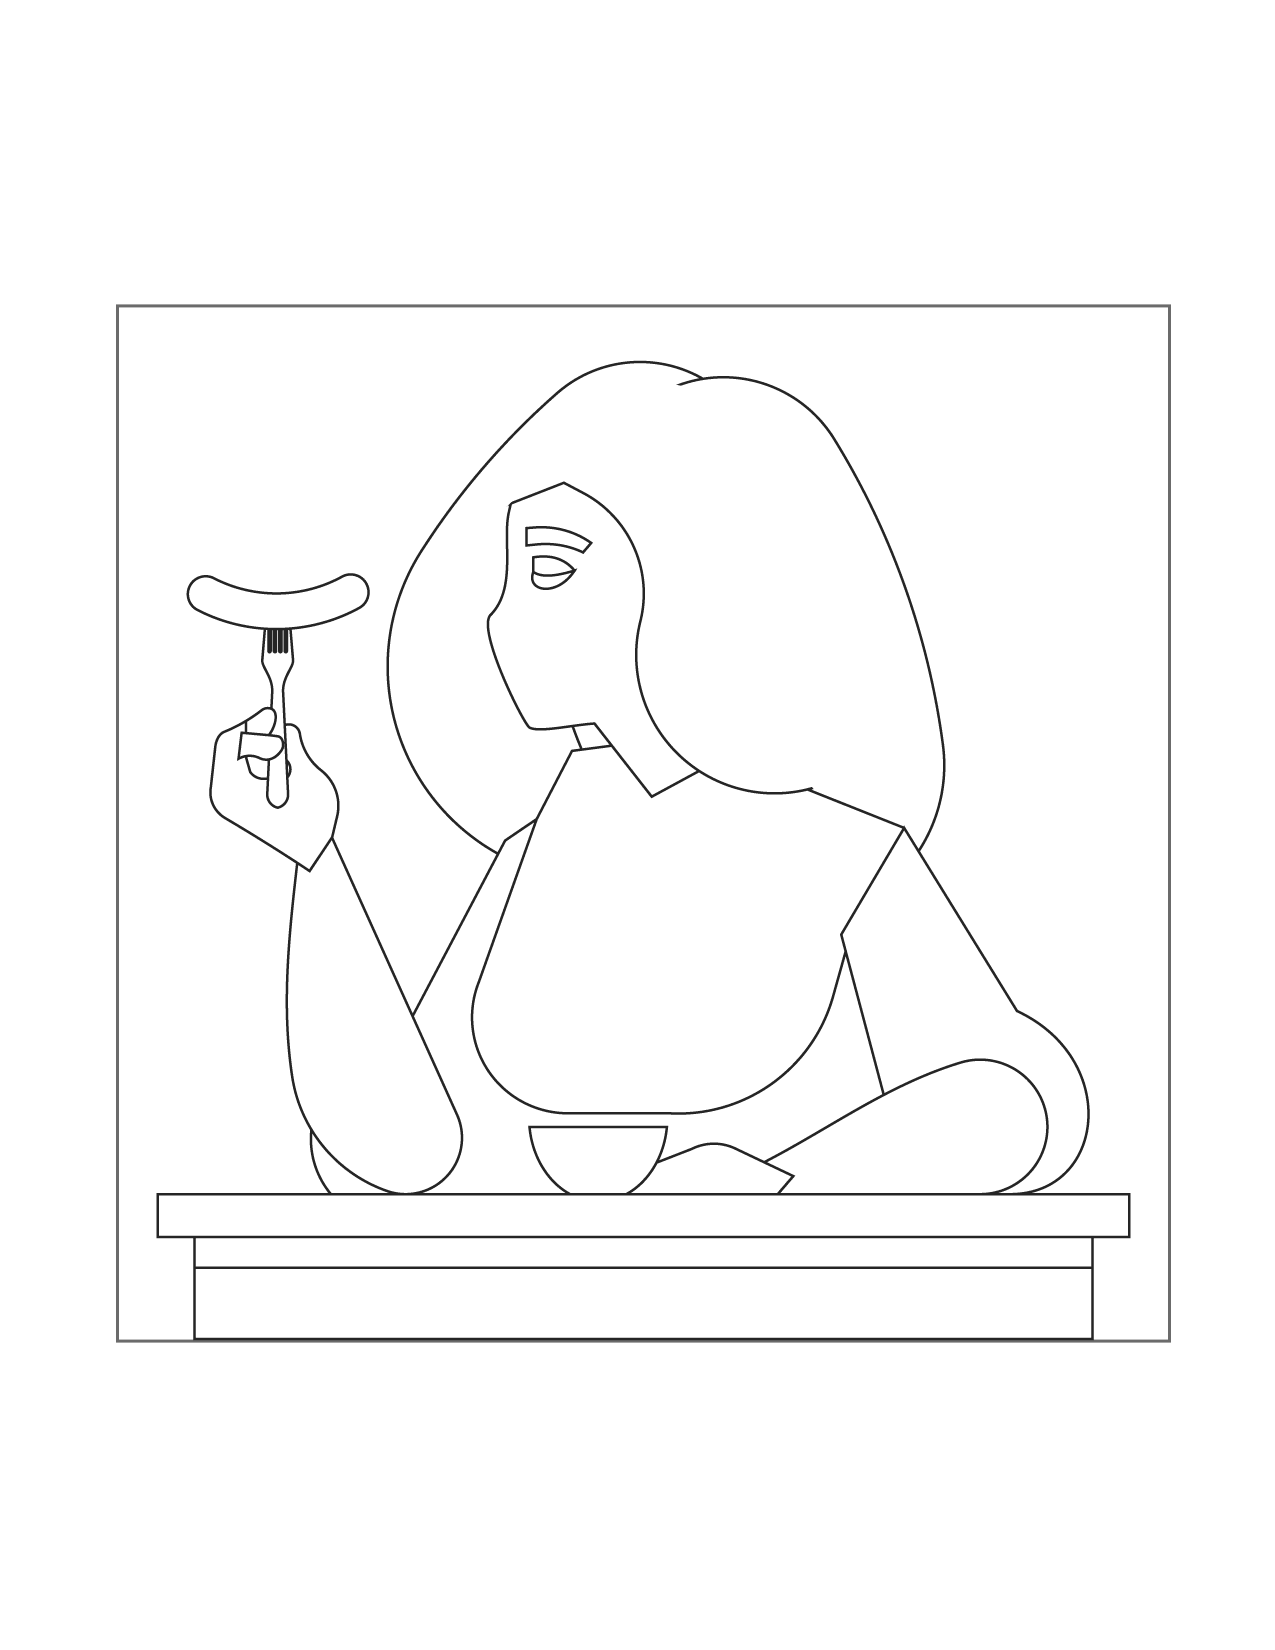 Woman Eating Sausage For Breakfast Coloring Page